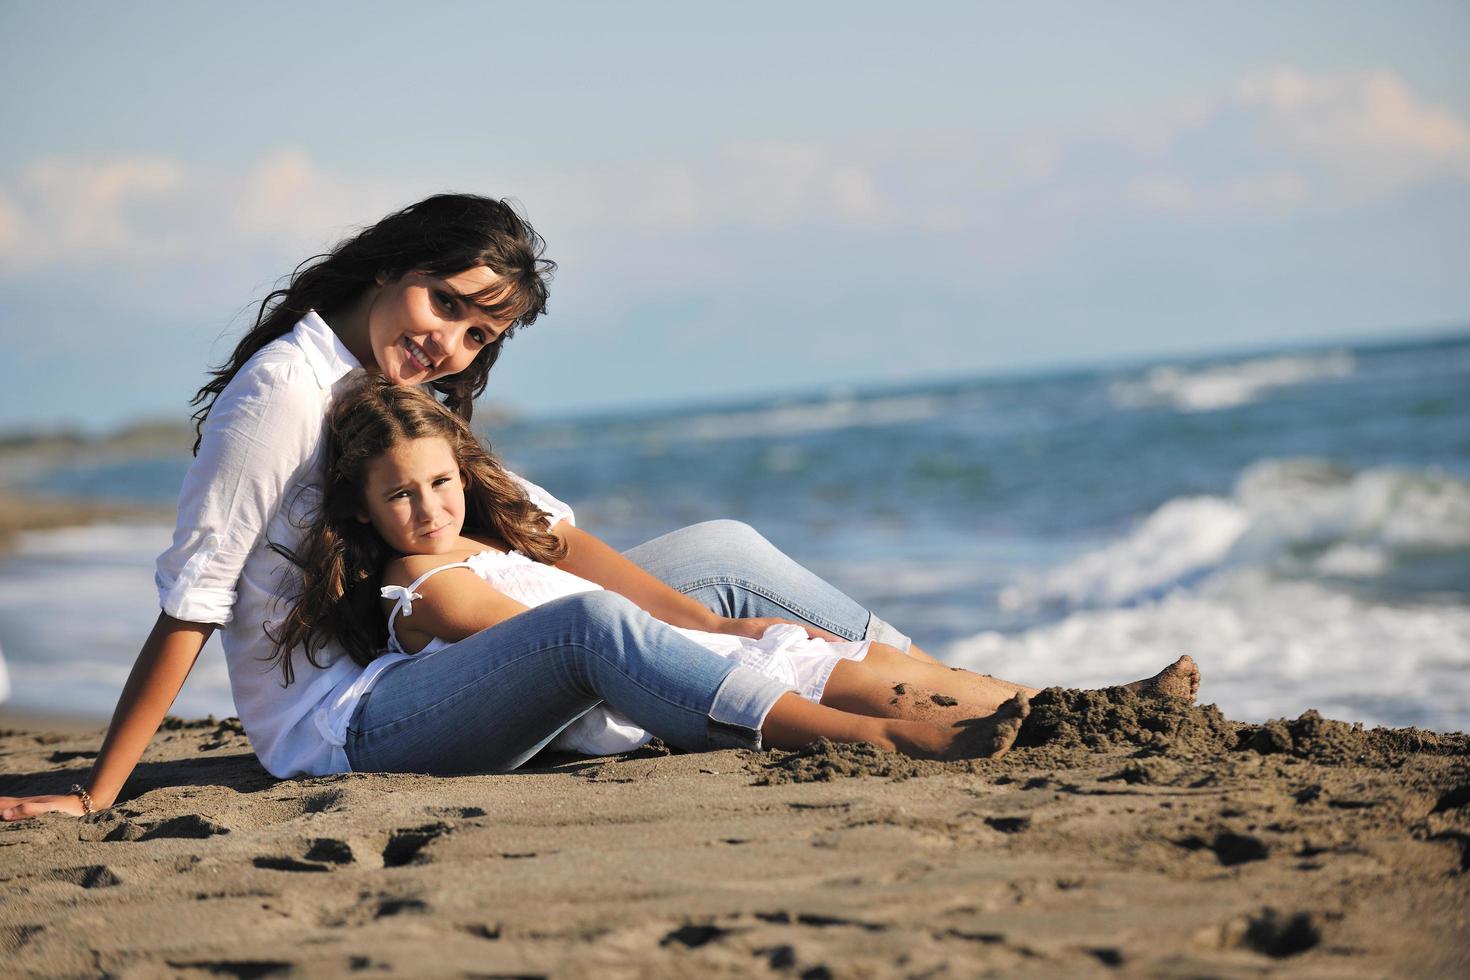 mom and daughter portrait on beach photo